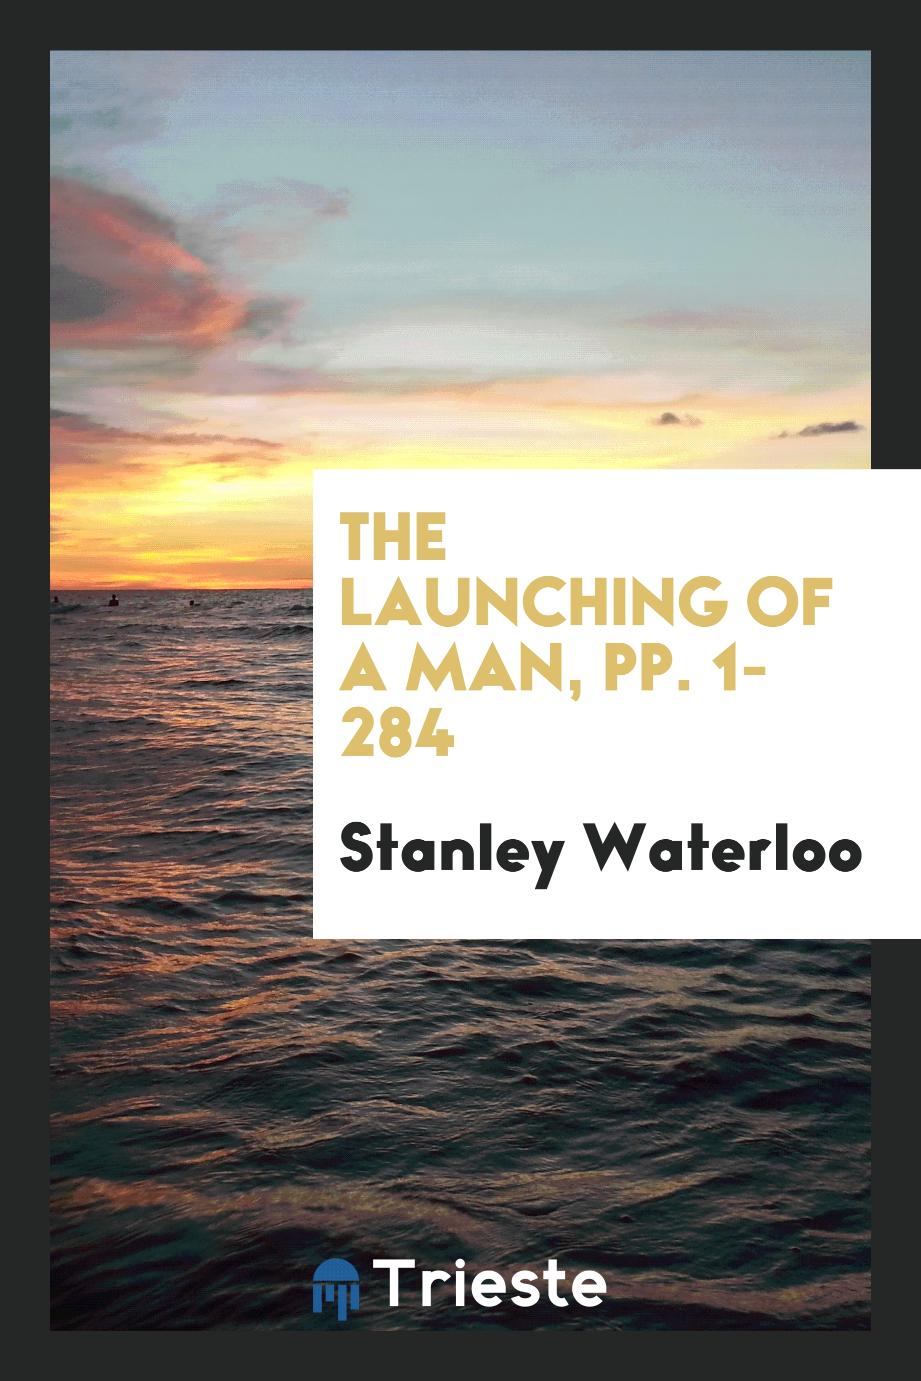 The Launching of a Man, pp. 1-284